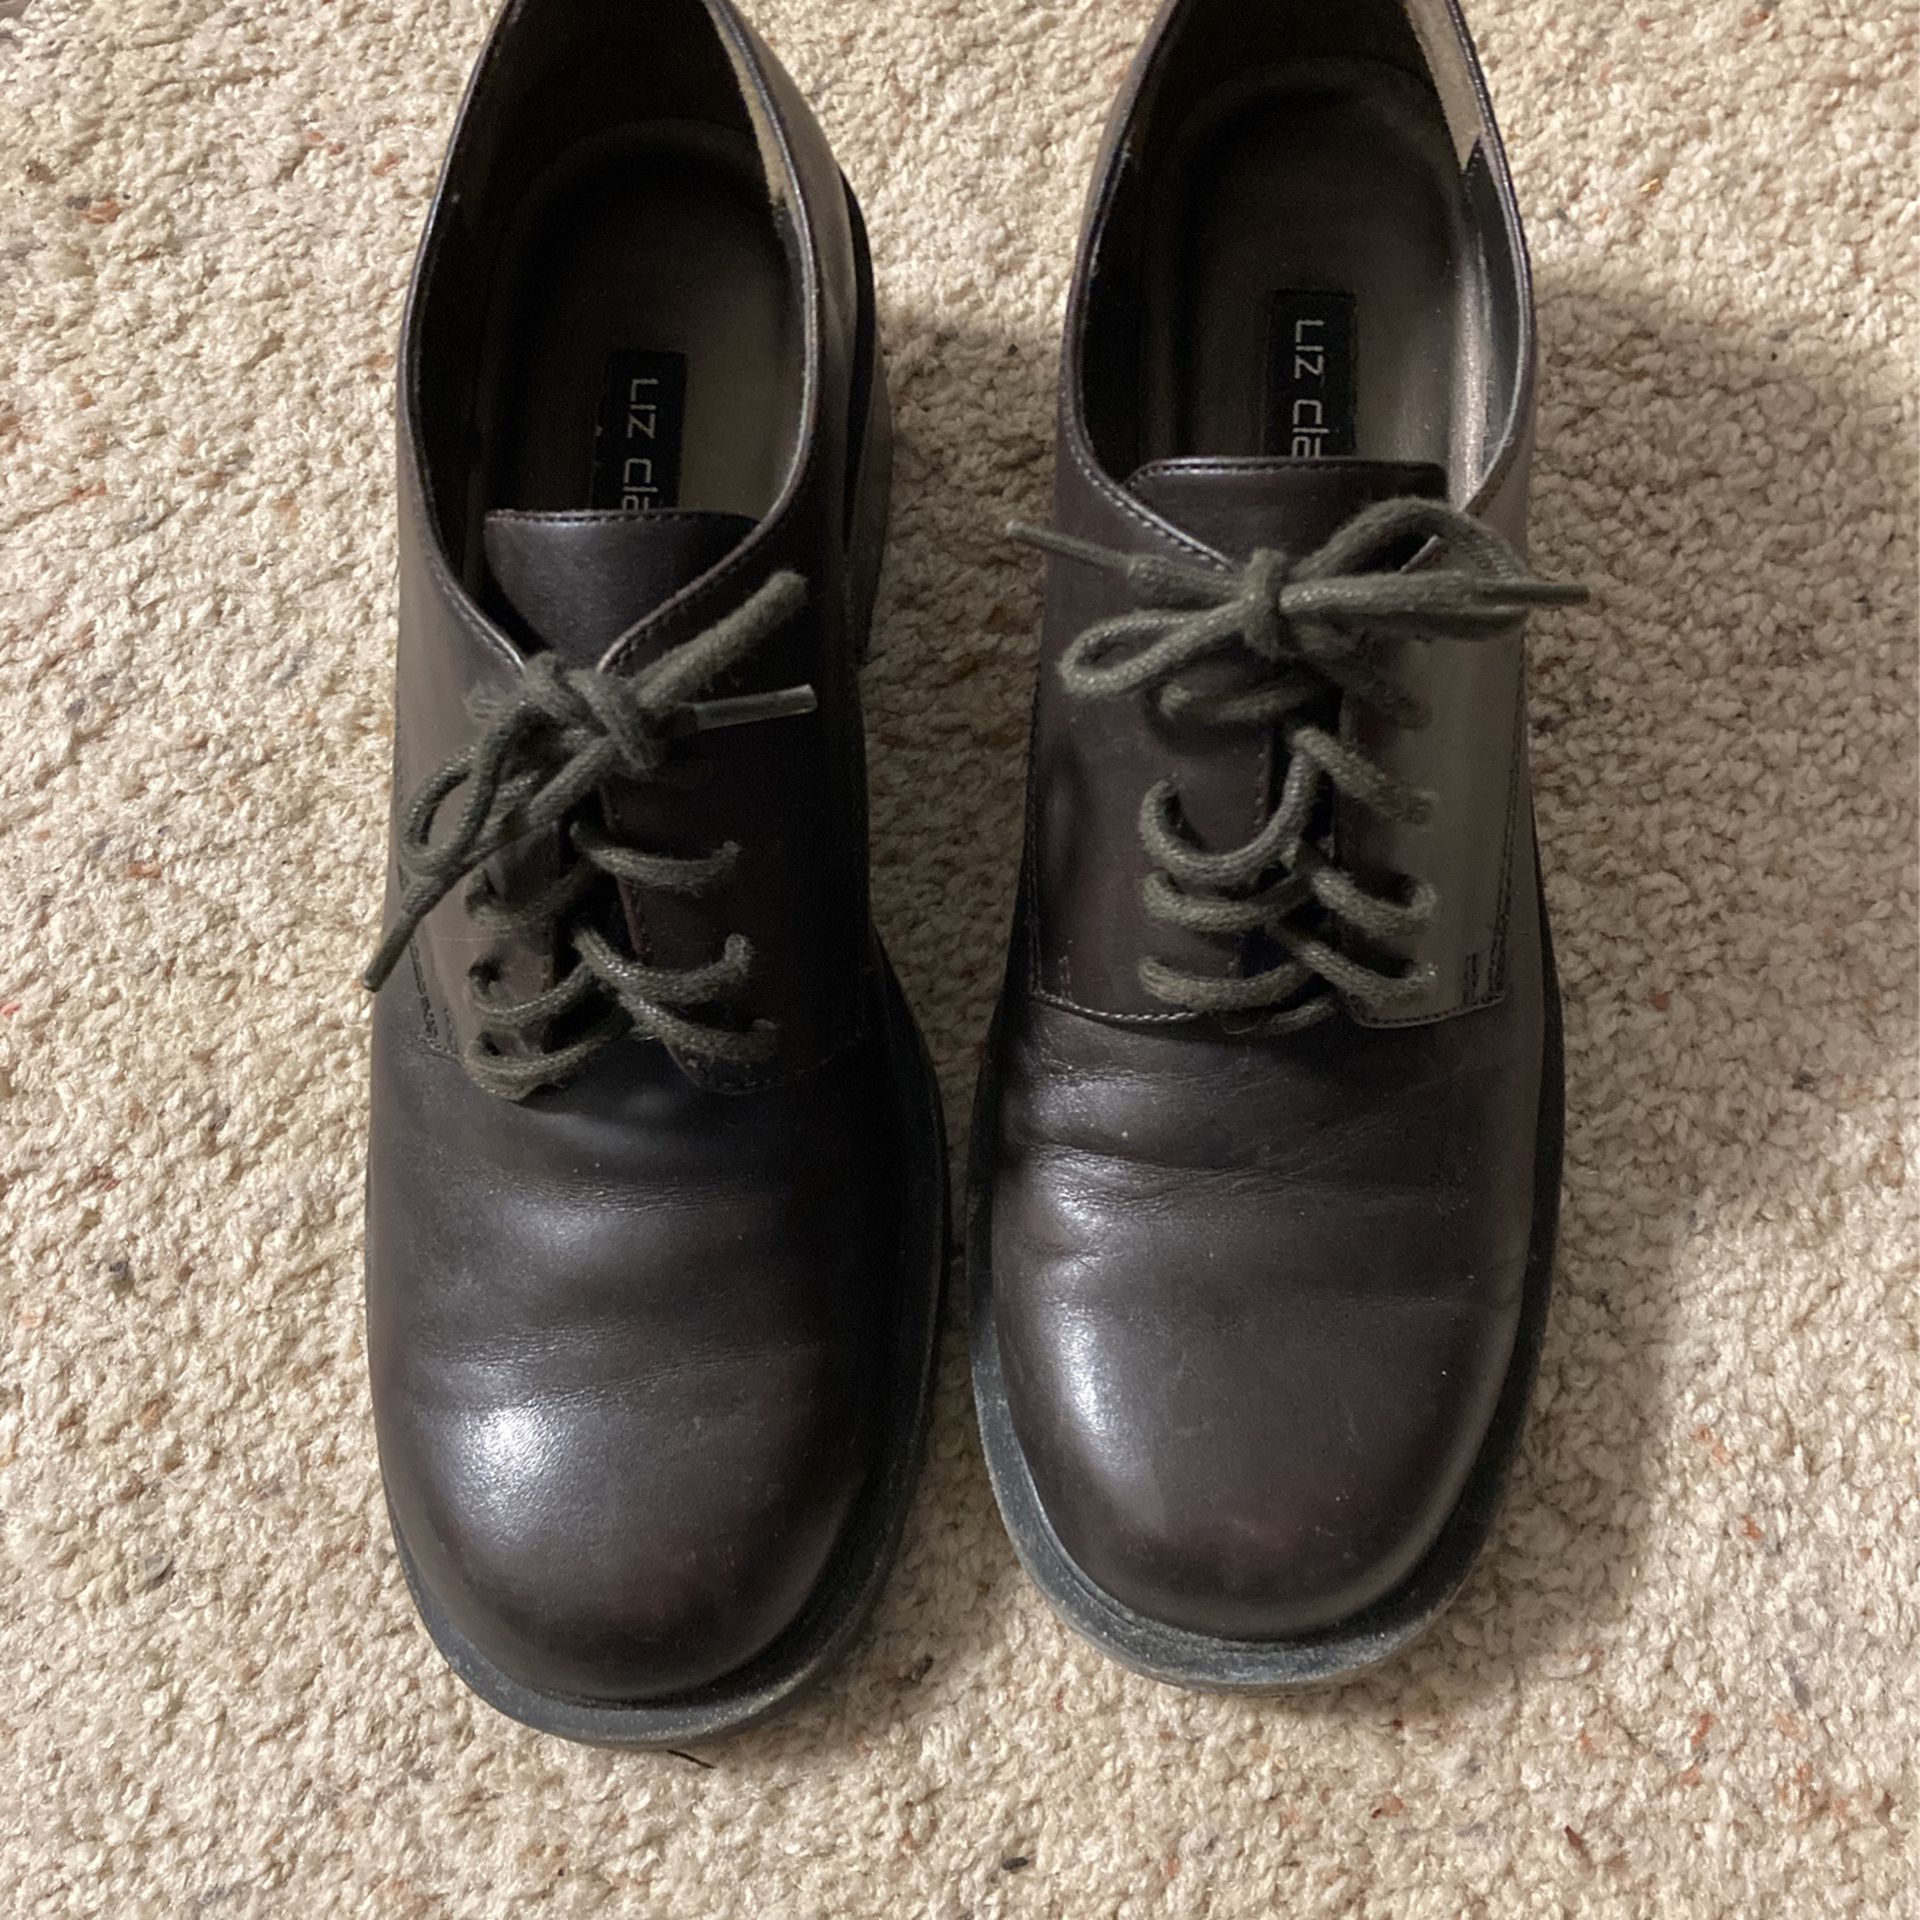 Liz Claiborne Brown Leather Ladies Oxford Shoes for Sale in Wexford, PA ...